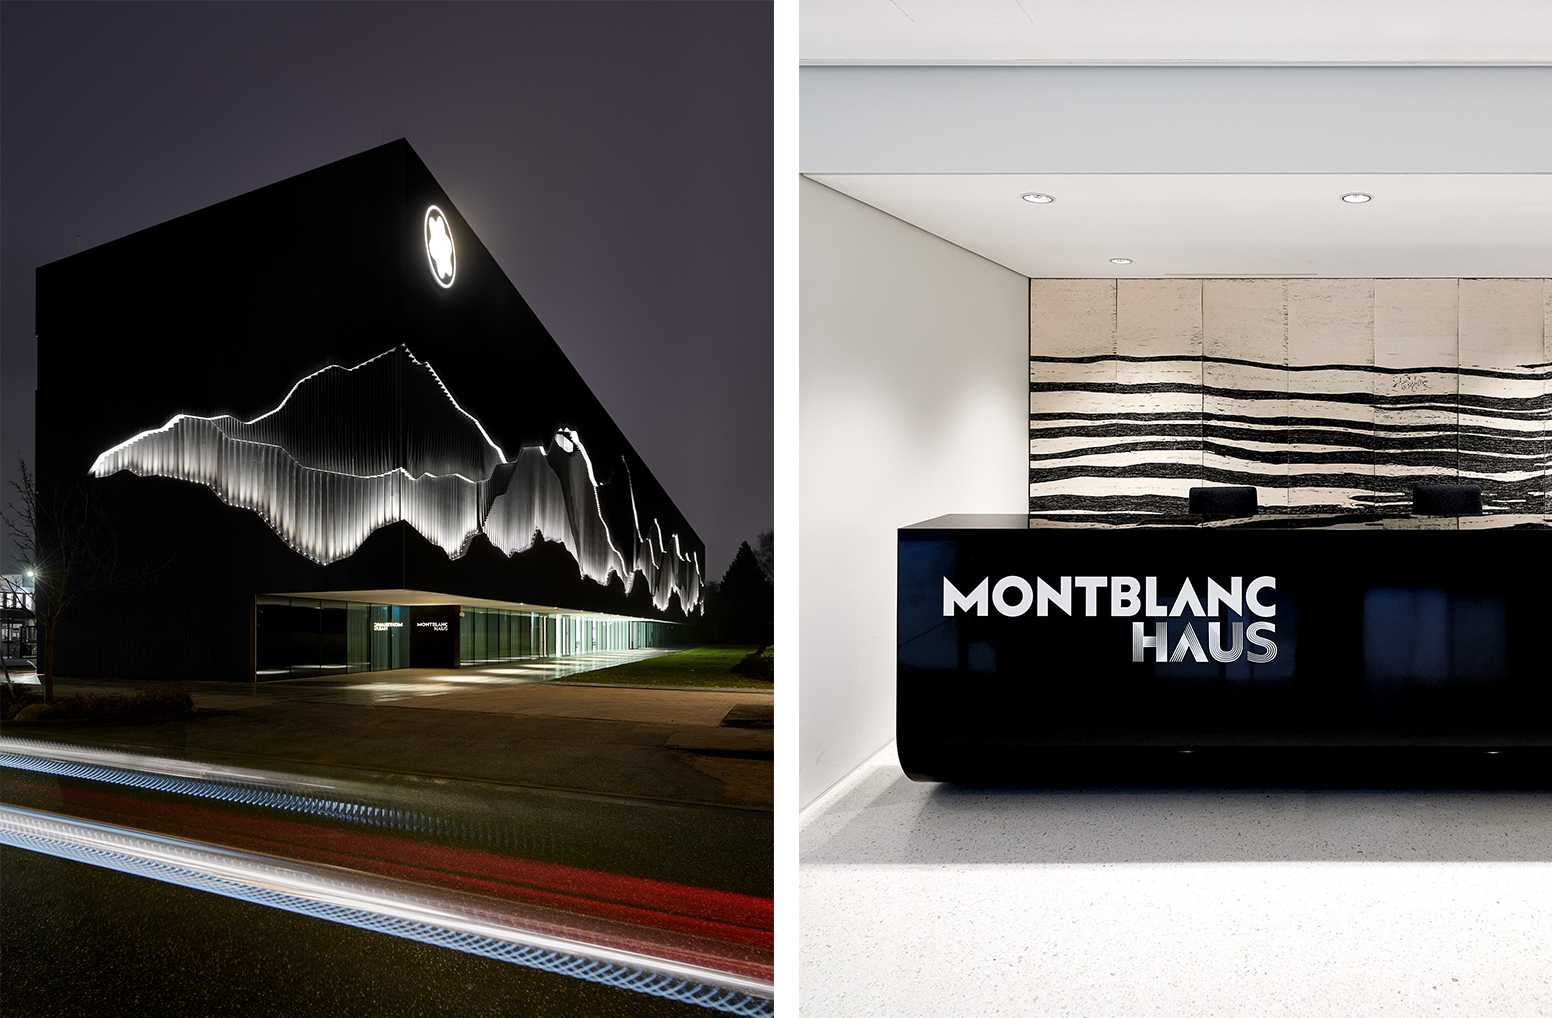 Montblanc Haus, Hamburg. Inside the iconic building (photo on the right), detail of the reception desk in Corian<sup>®</sup> Deep Nocturne with mirror polished finish. Design by Projectiles; fabrication by Crea Diffusion ; images by Daniel Schafer; all right reserved.